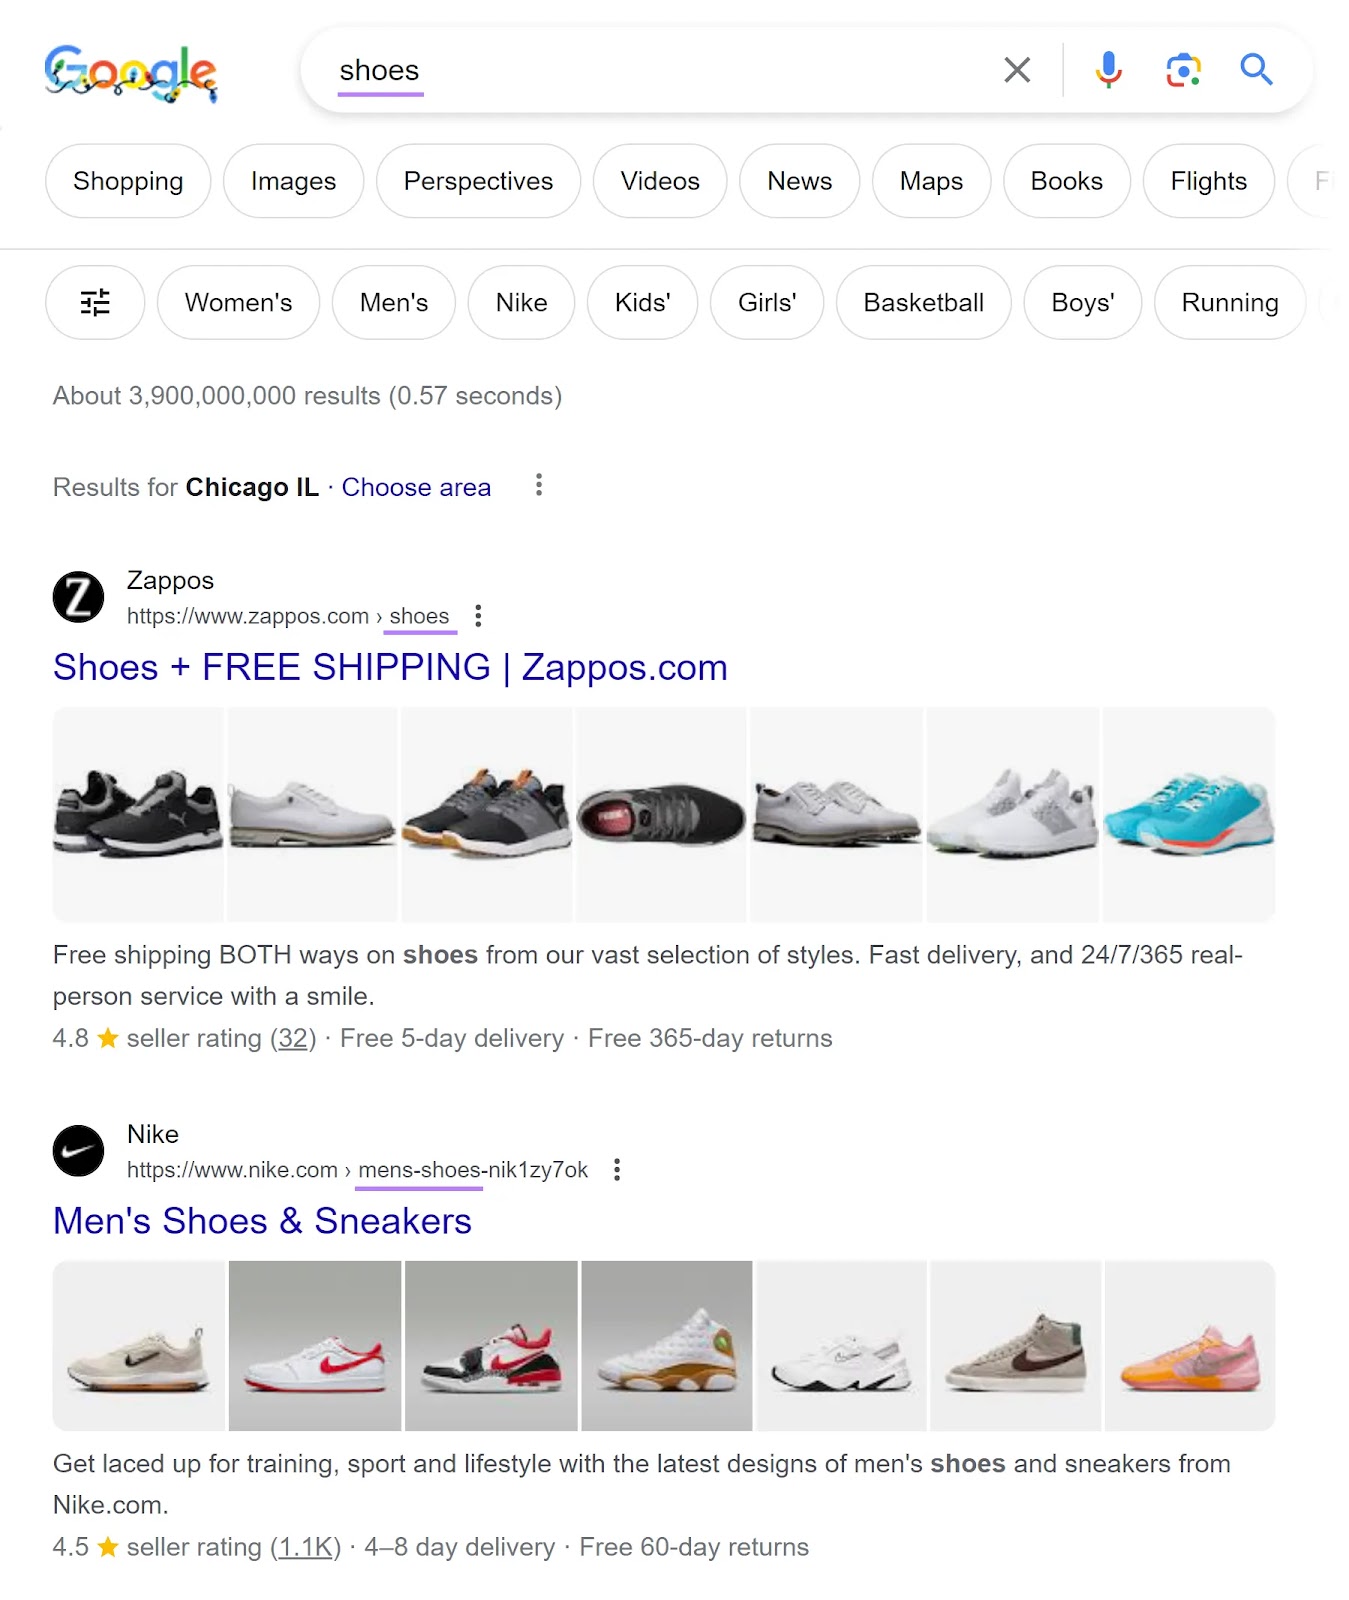 Google's SERP for "shoes" with category pages highlighted in the results